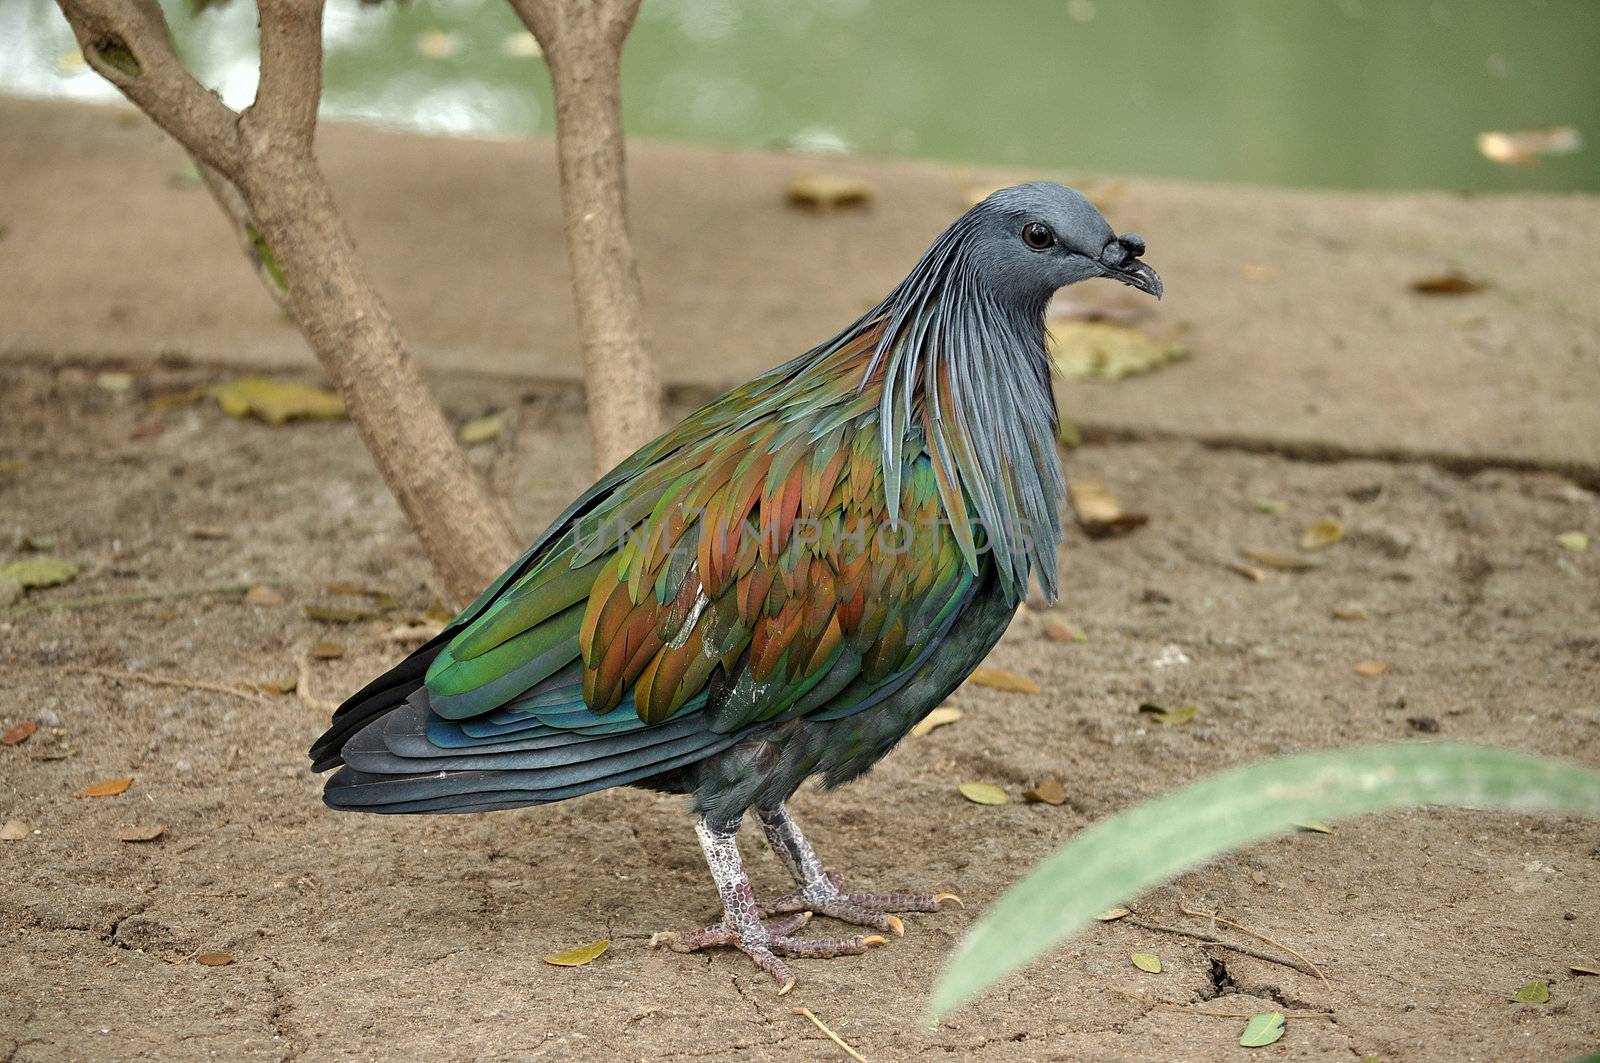 The Nicobar Pigeon, Caloenas nicobarica, is a pigeon found on small islands and in coastal regions from the Nicobar Islands, east through the Malay Archipelago, to the Solomons and Palau.